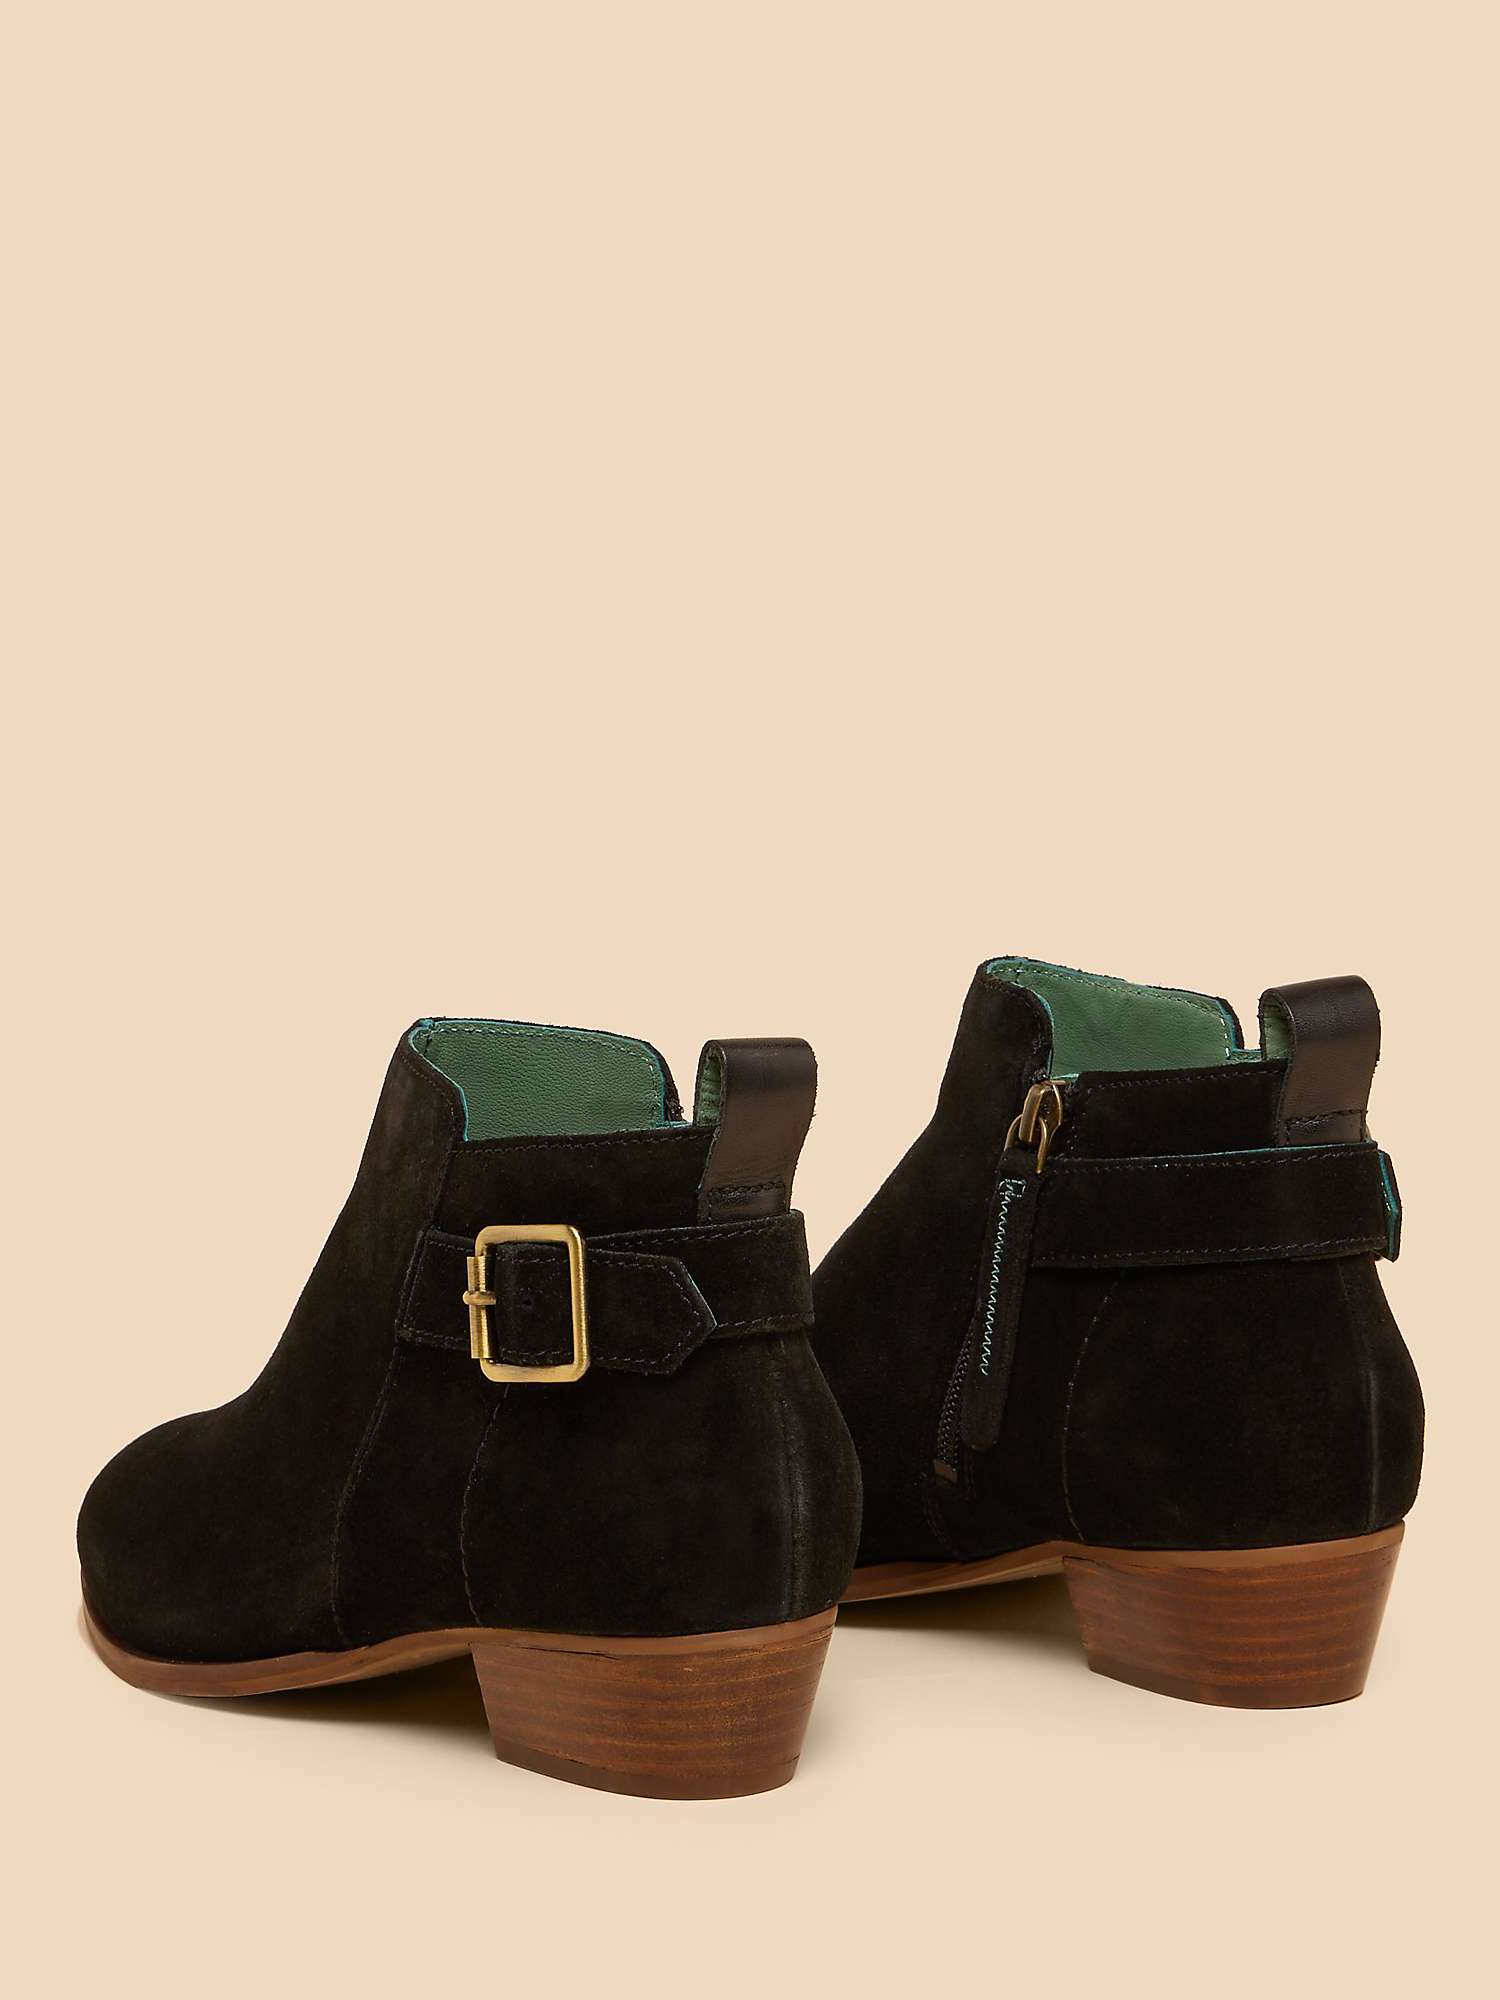 Buy White Stuff Buckle Suede Ankle Boots, Pure Black Online at johnlewis.com